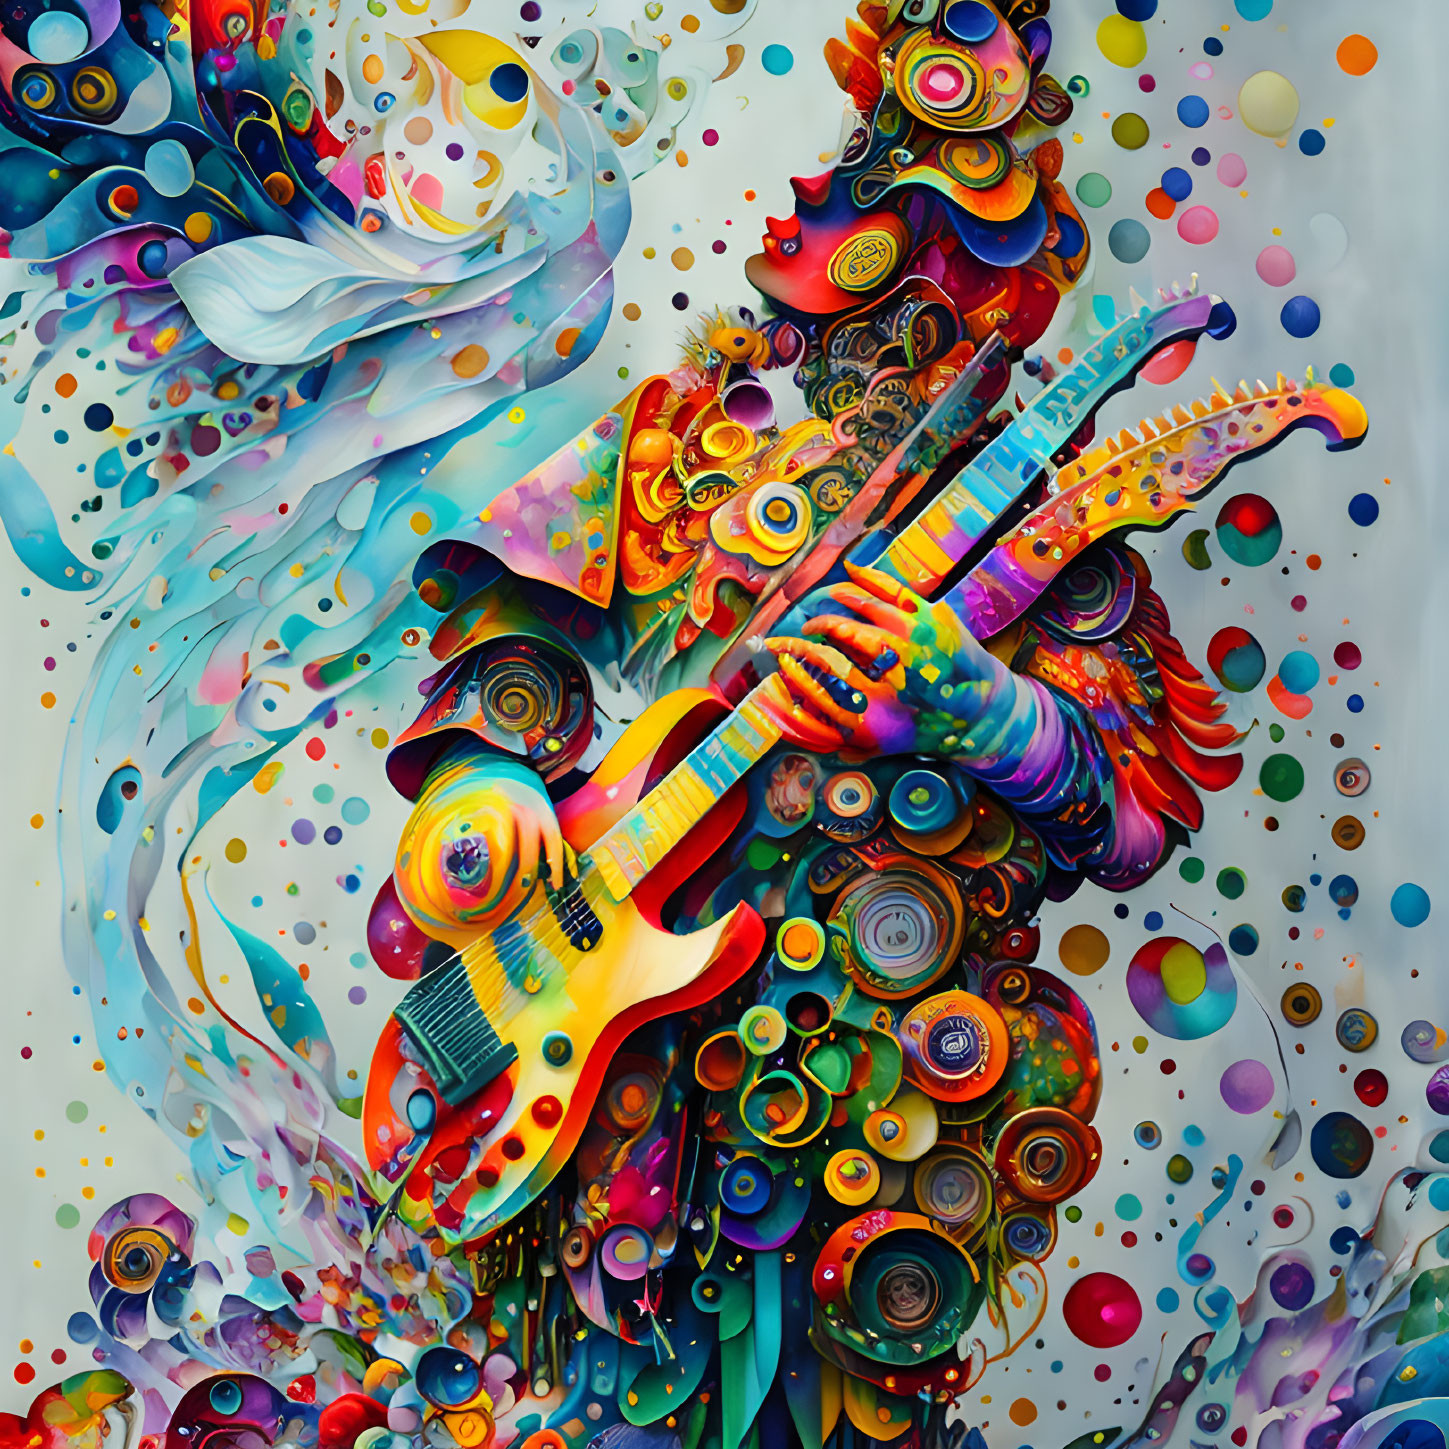 Colorful Abstract Art: Guitar-themed Fusion of Shapes and Patterns